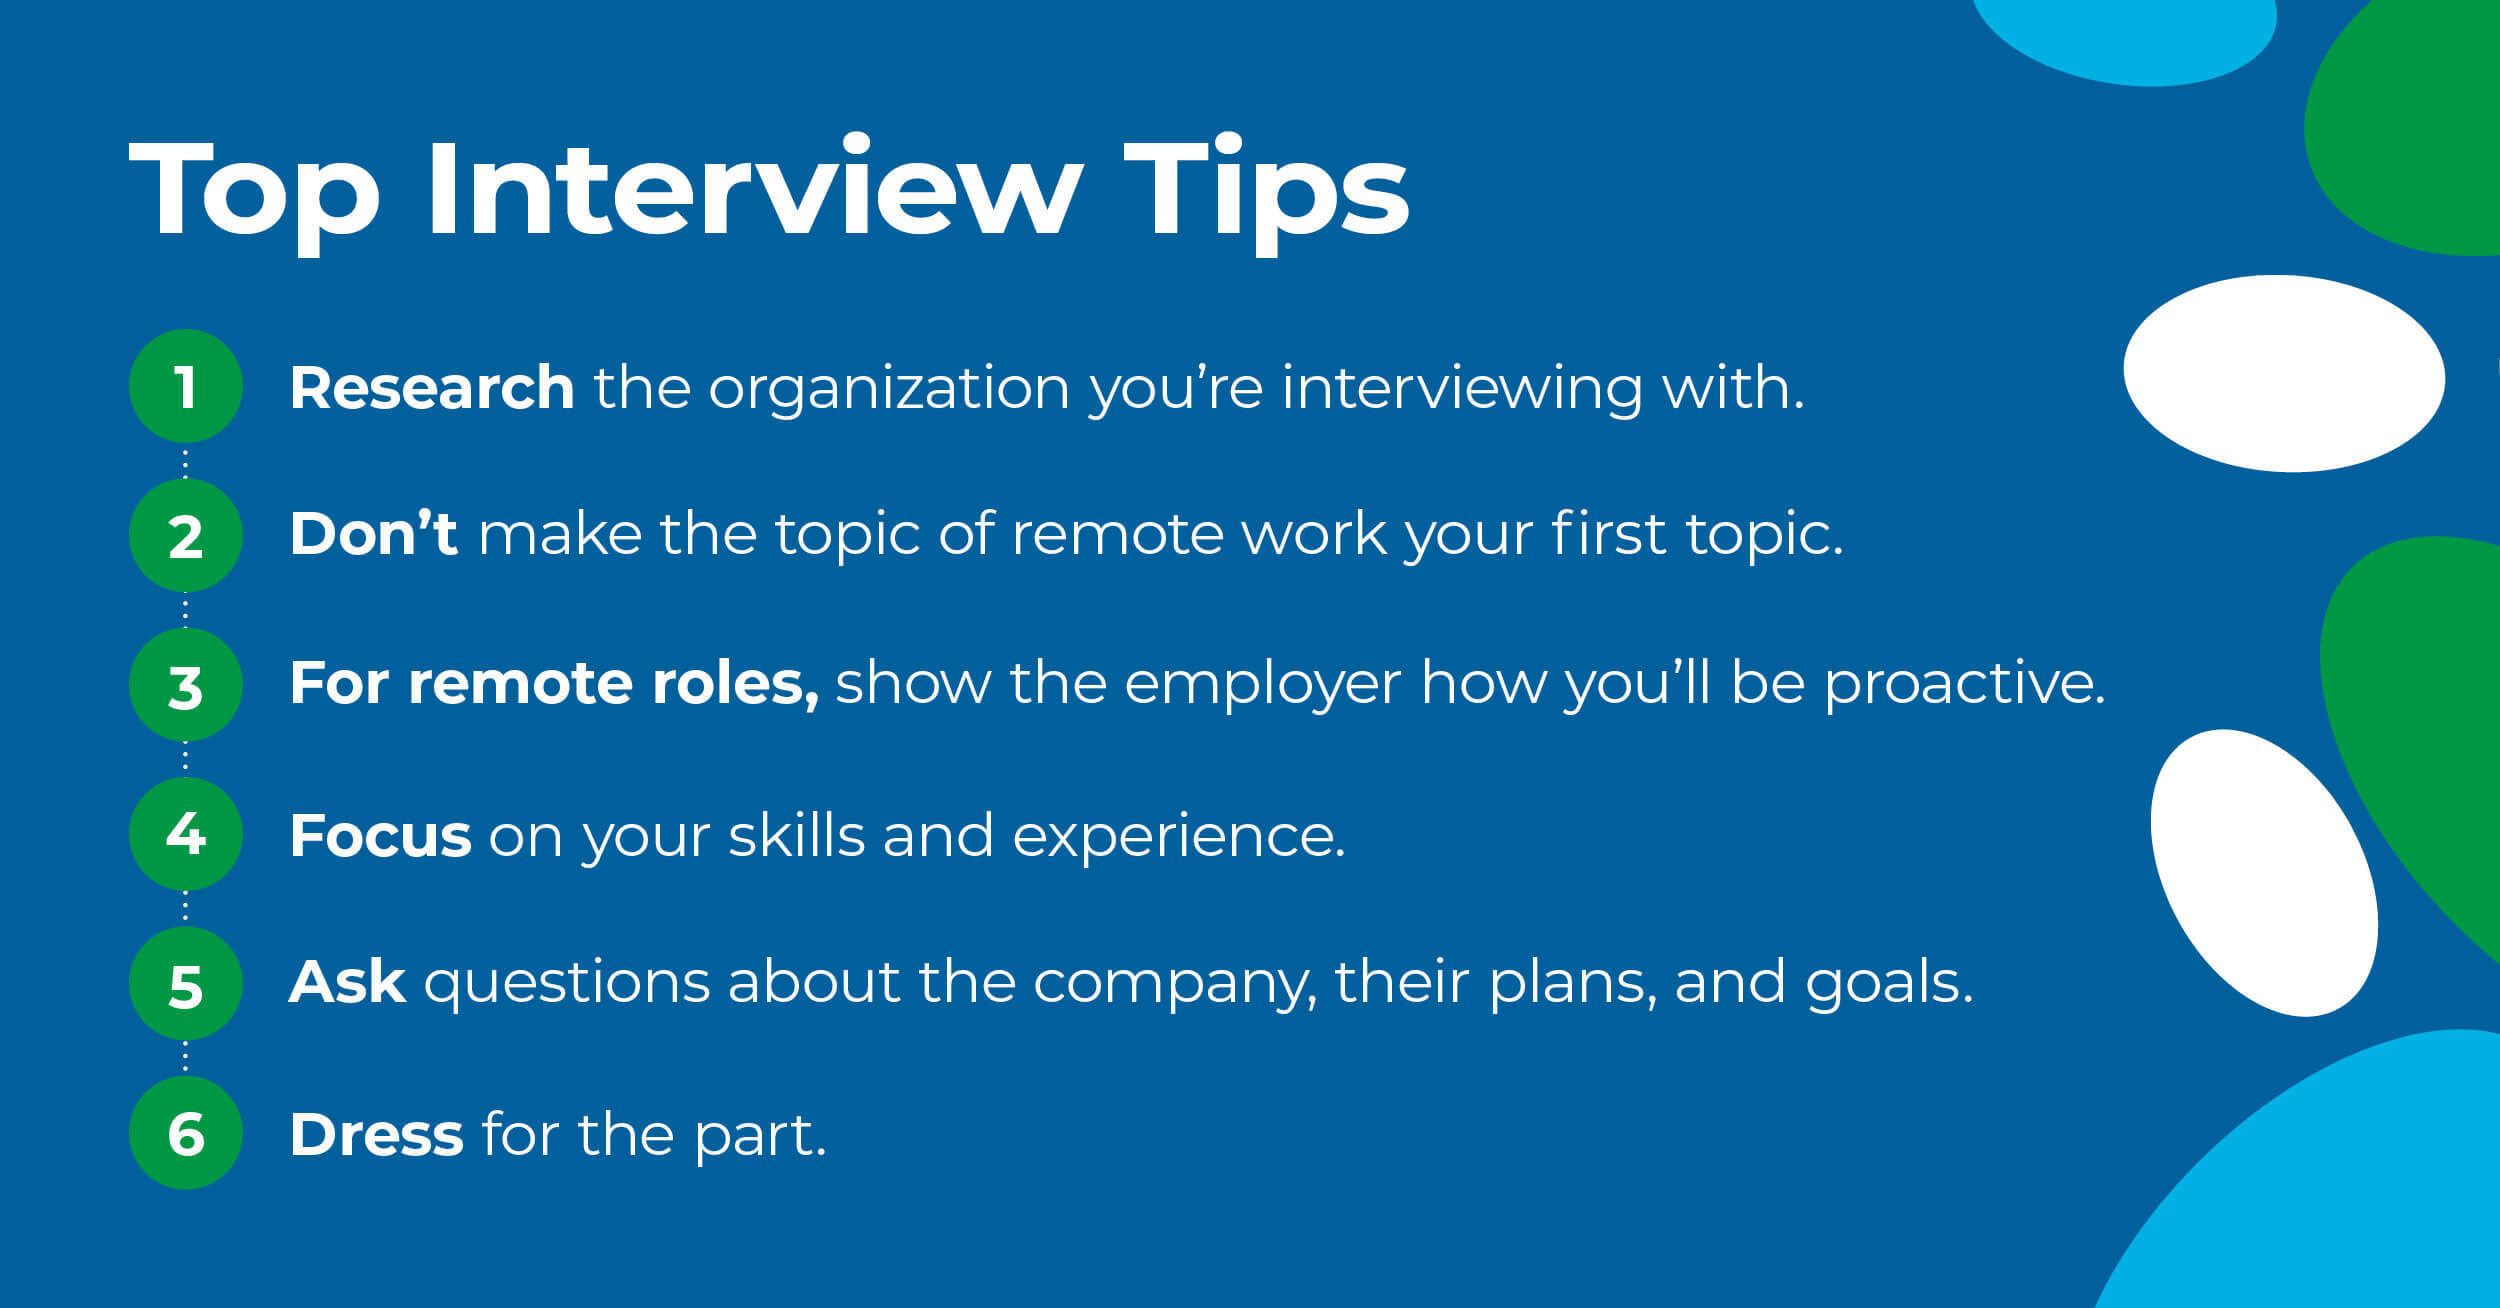 6 Interview tips for candidates.